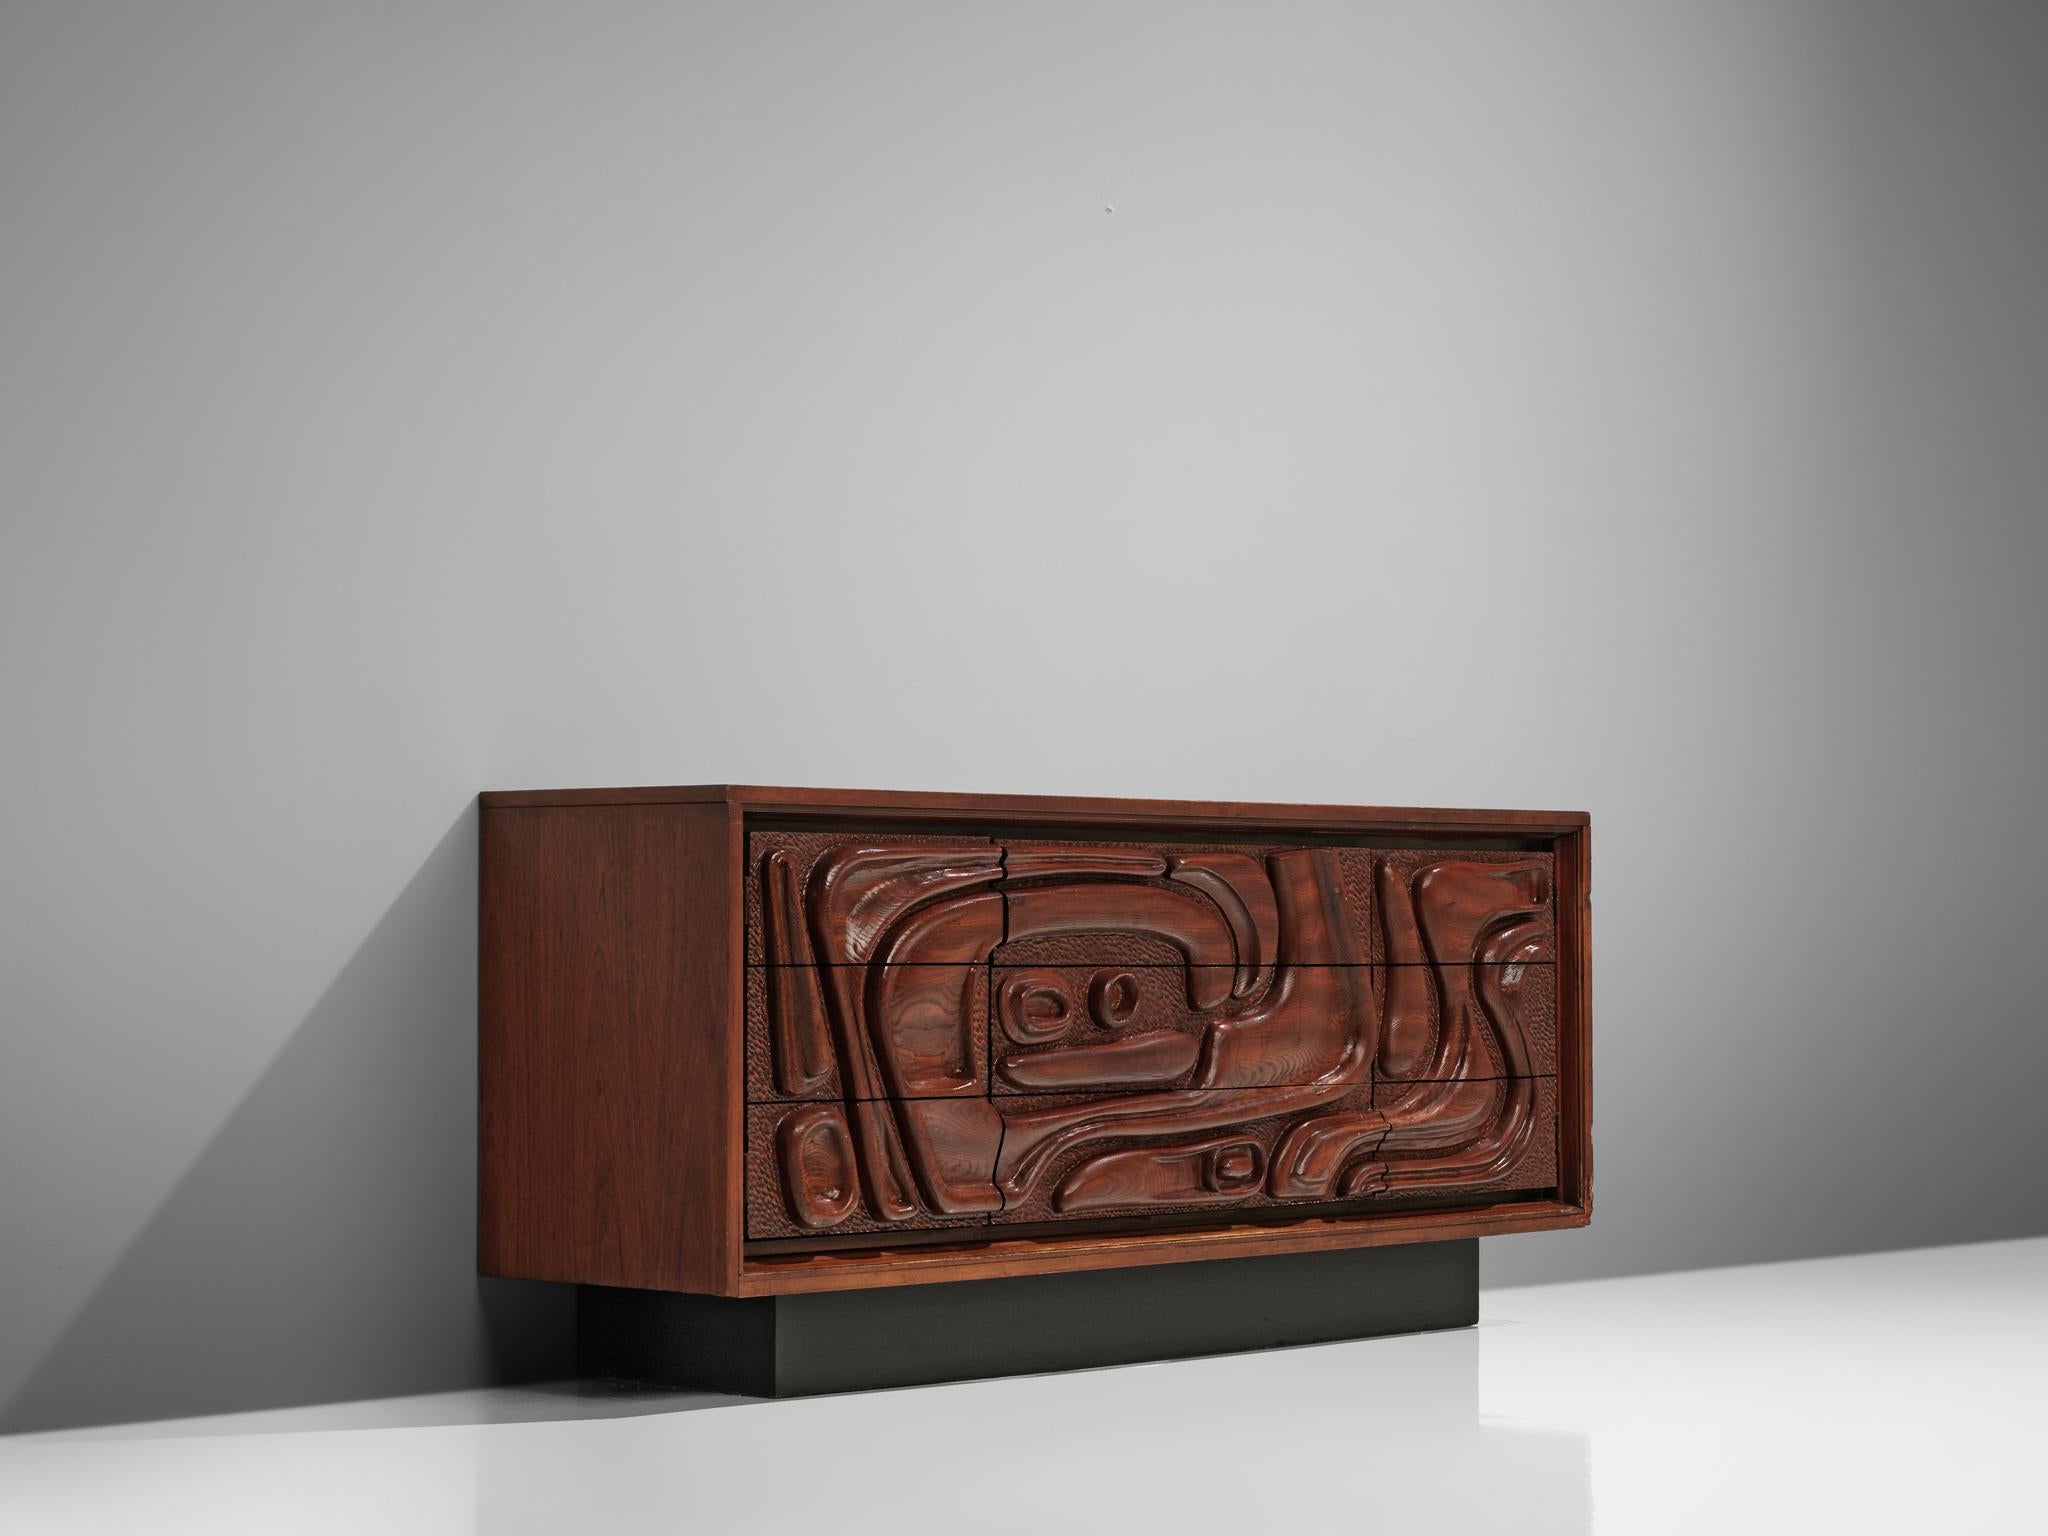 Pulaski Furniture Corporation, attributed to Witco, sideboard, walnut, United States, 1970s

A carved cabinet in walnut by Pulaski Furniture Corporation. The wildly carved front shows an organic, tribal inspired structure. The sideboard consists of